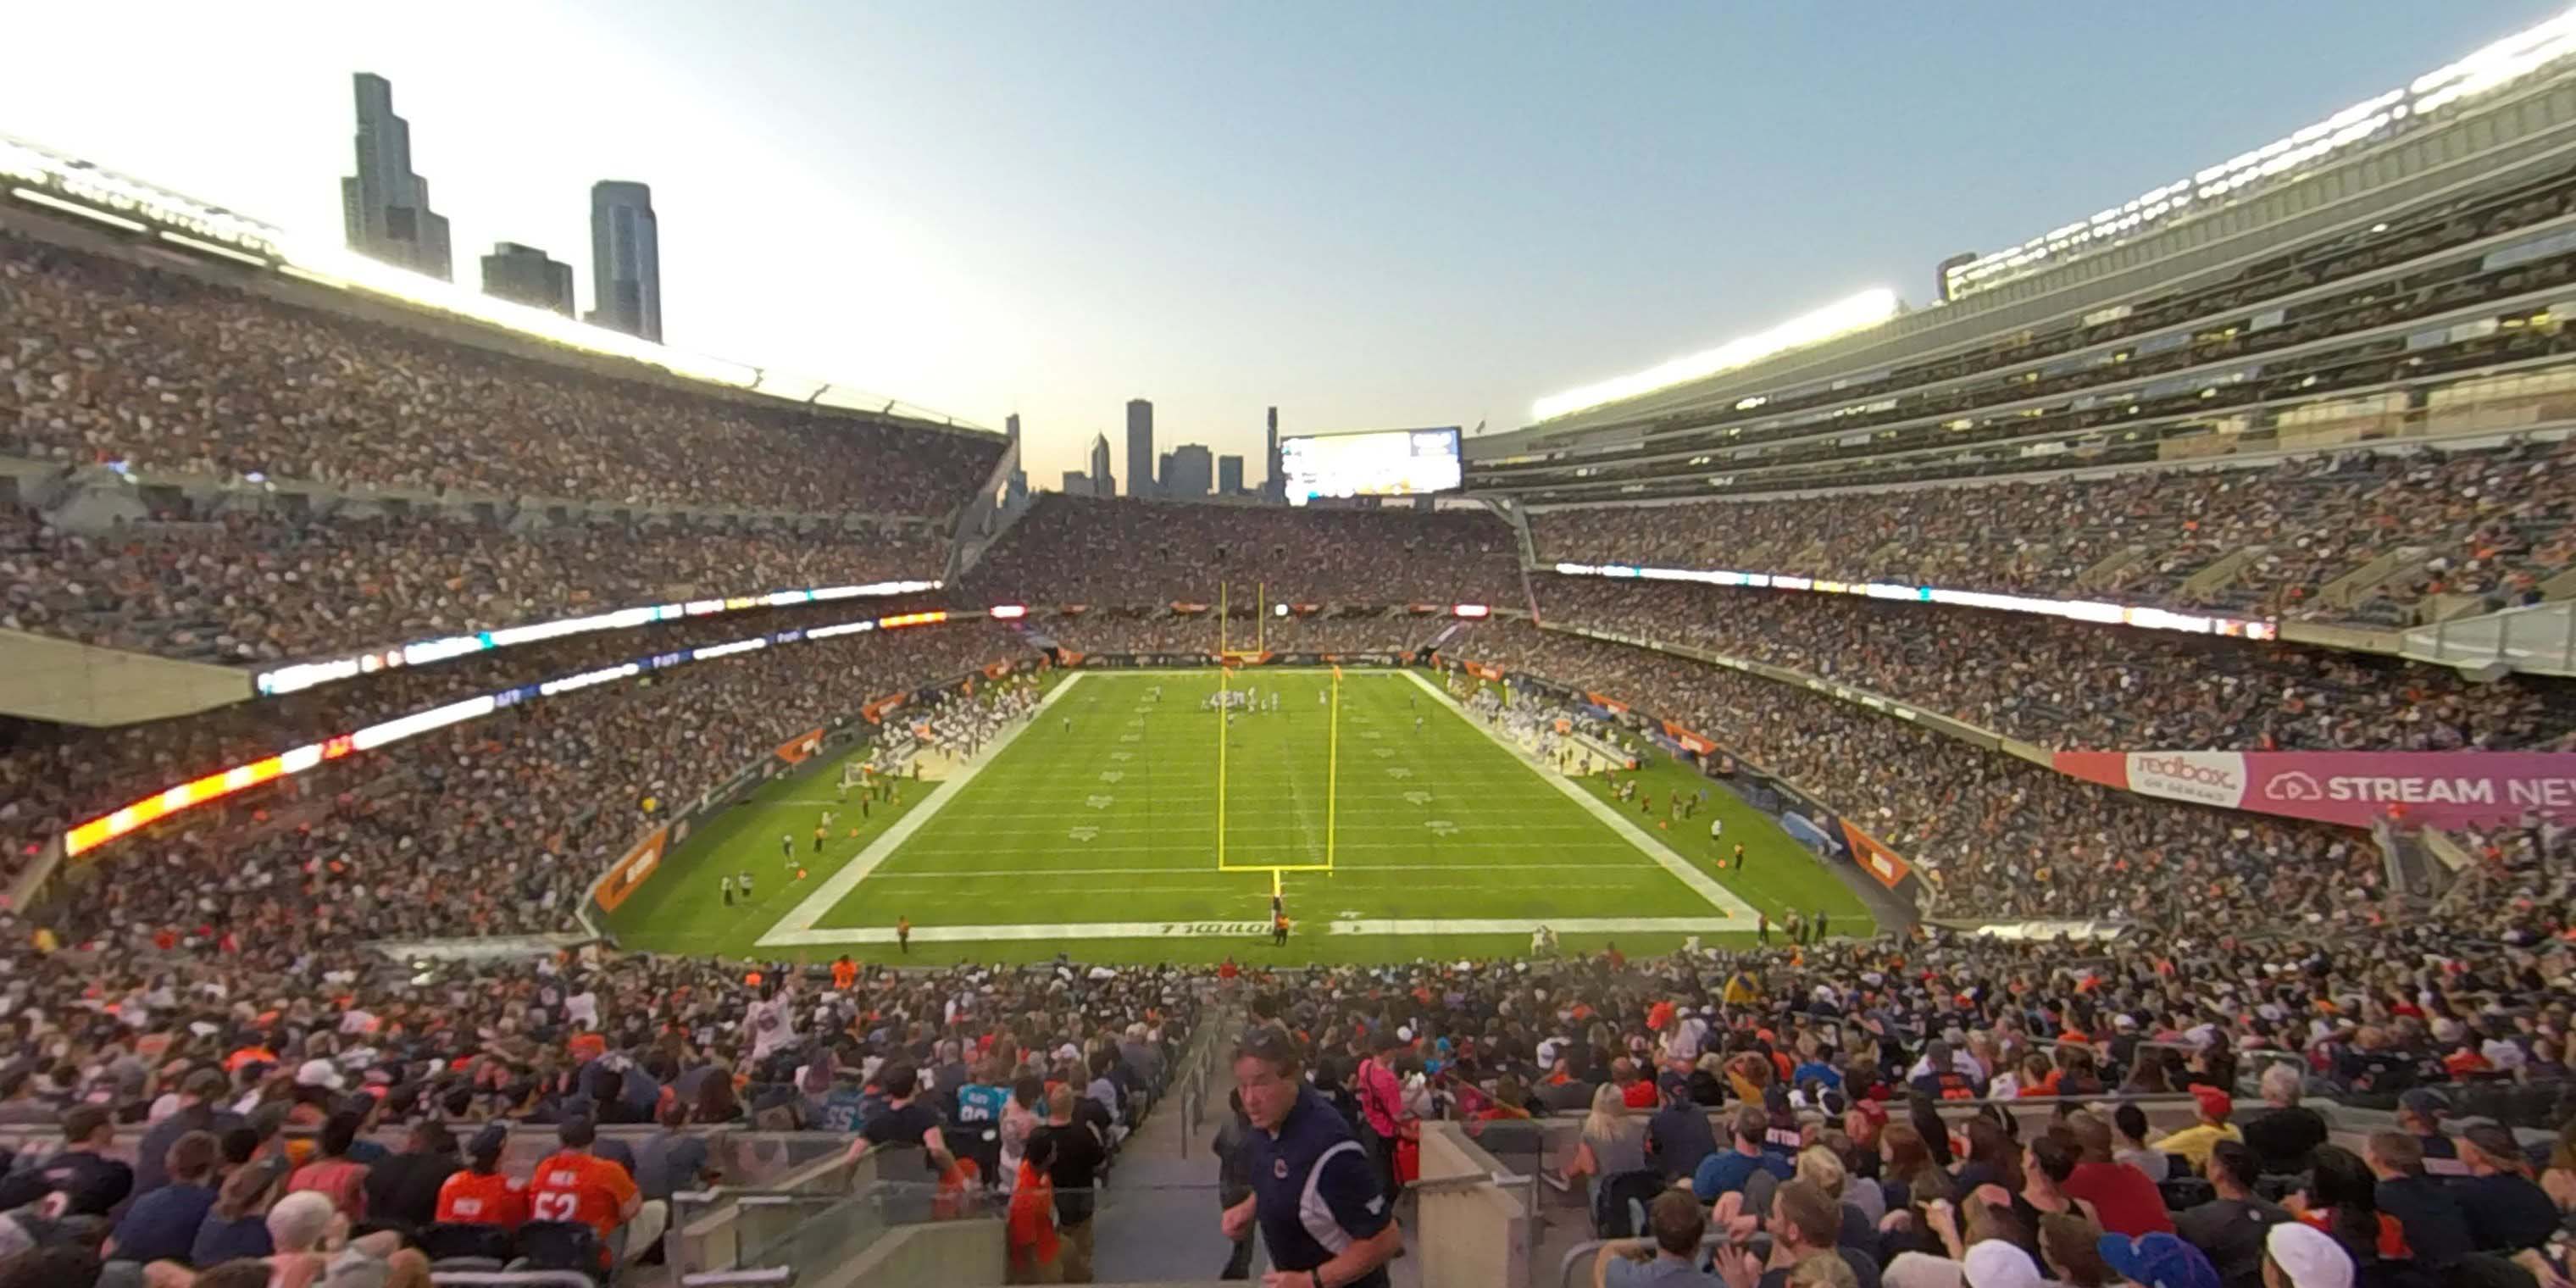 section 322 panoramic seat view  for football - soldier field